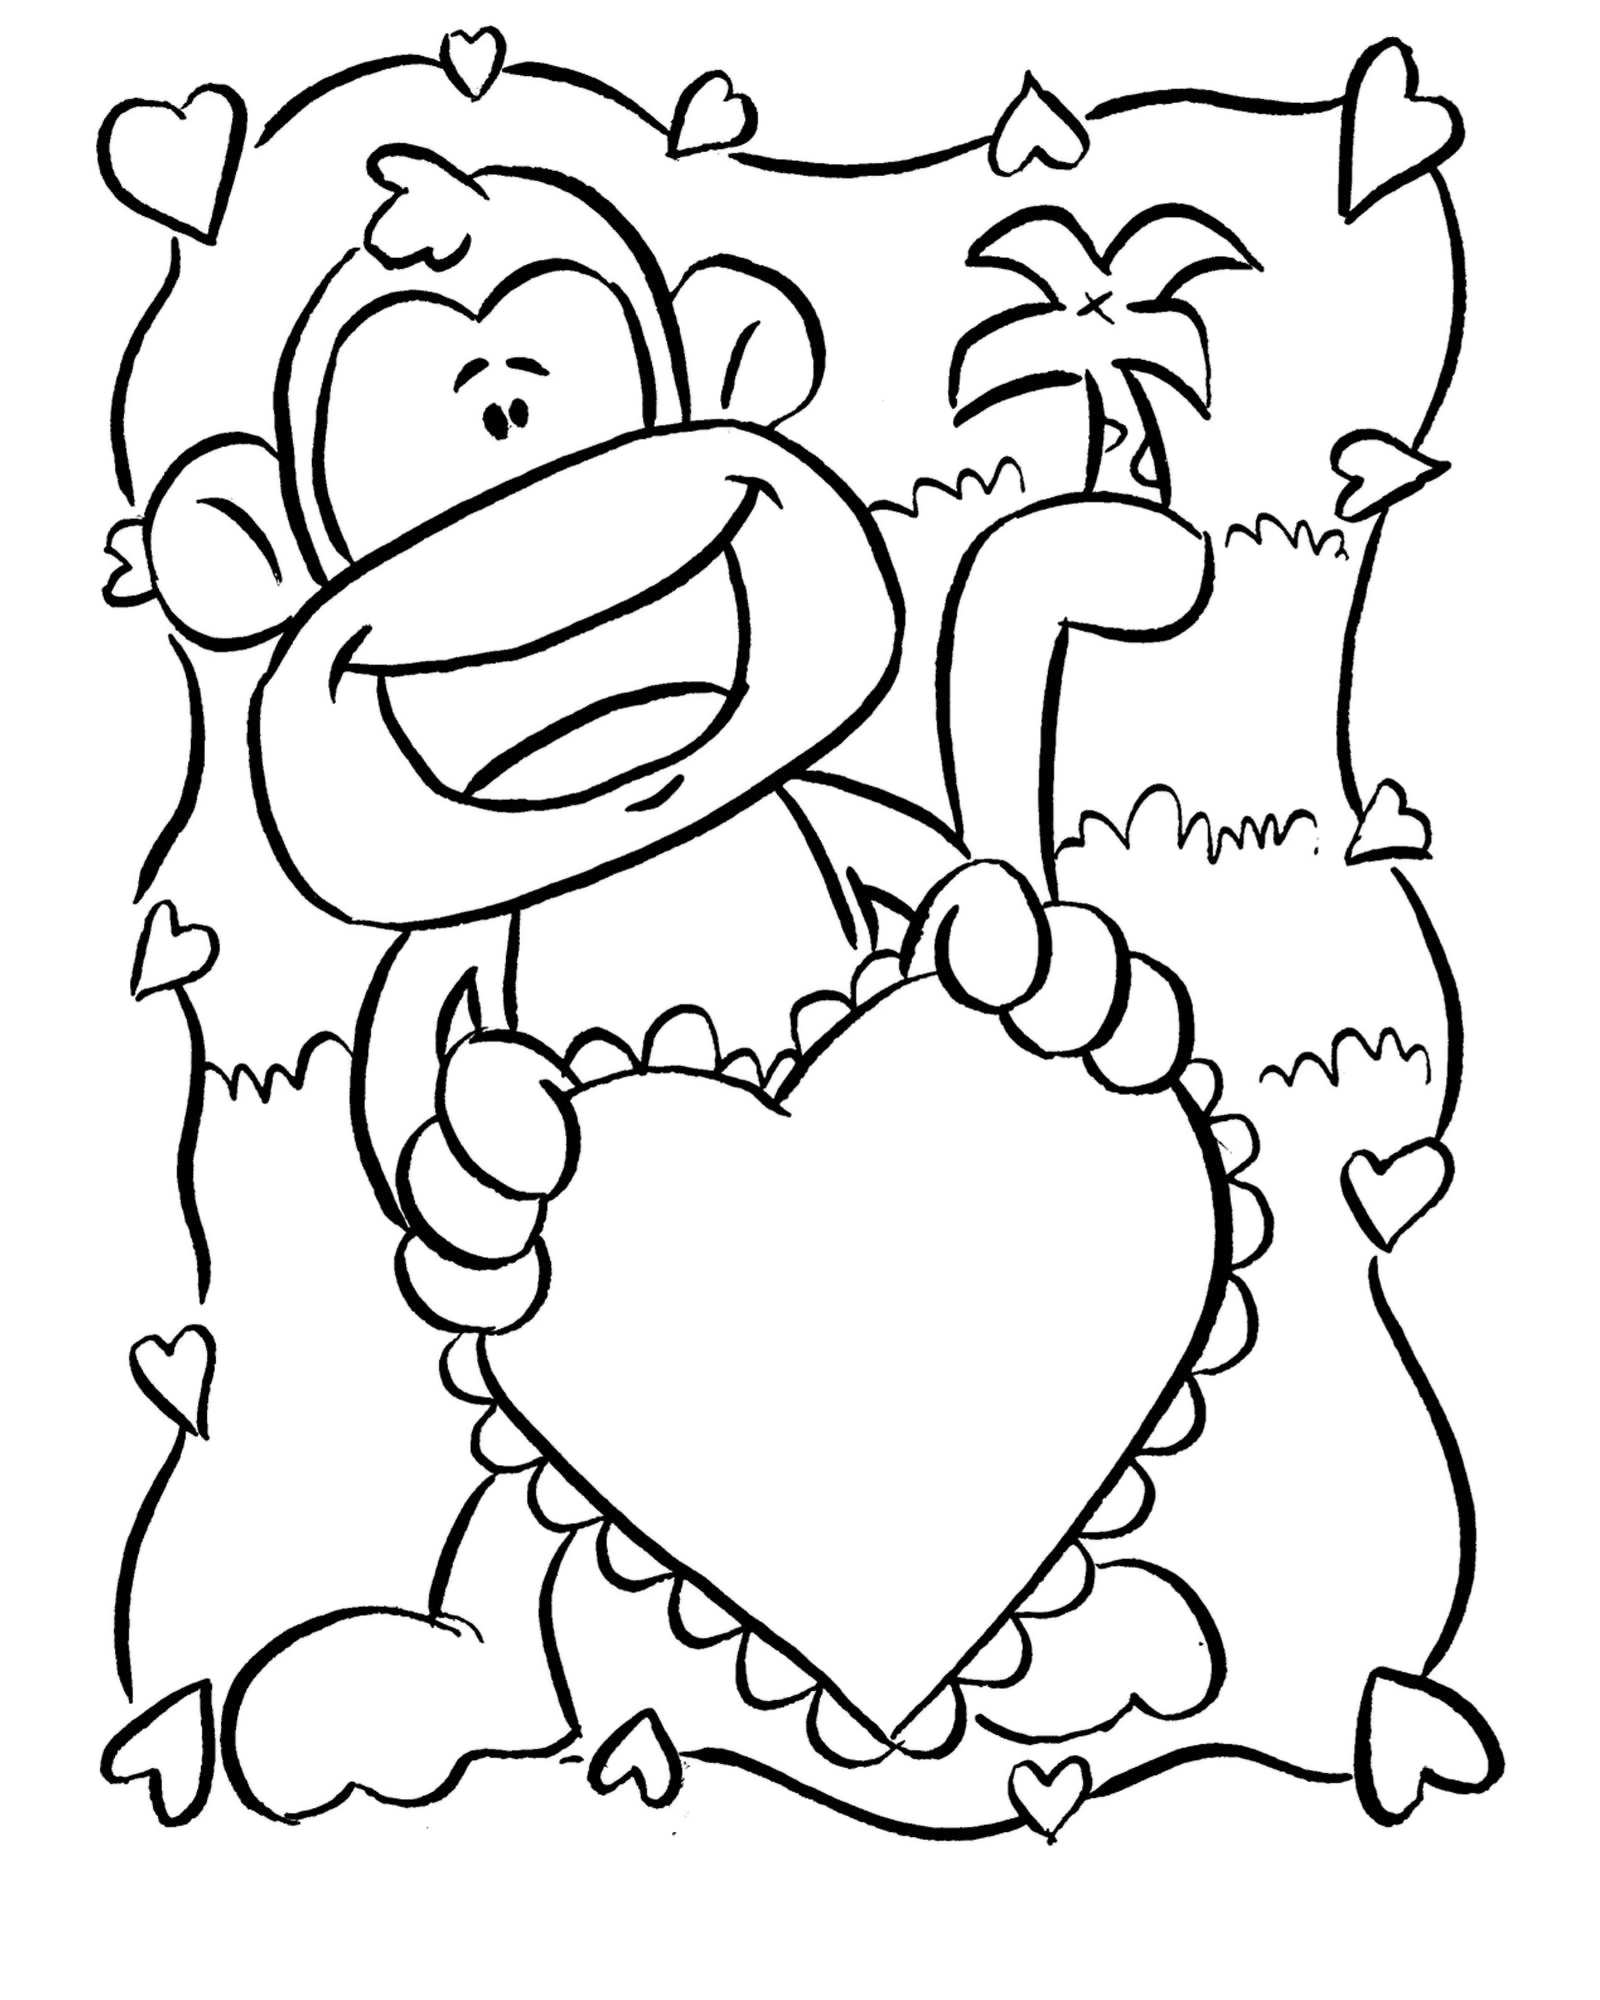  Monkey coloring pages | Monkey coloring page | #15